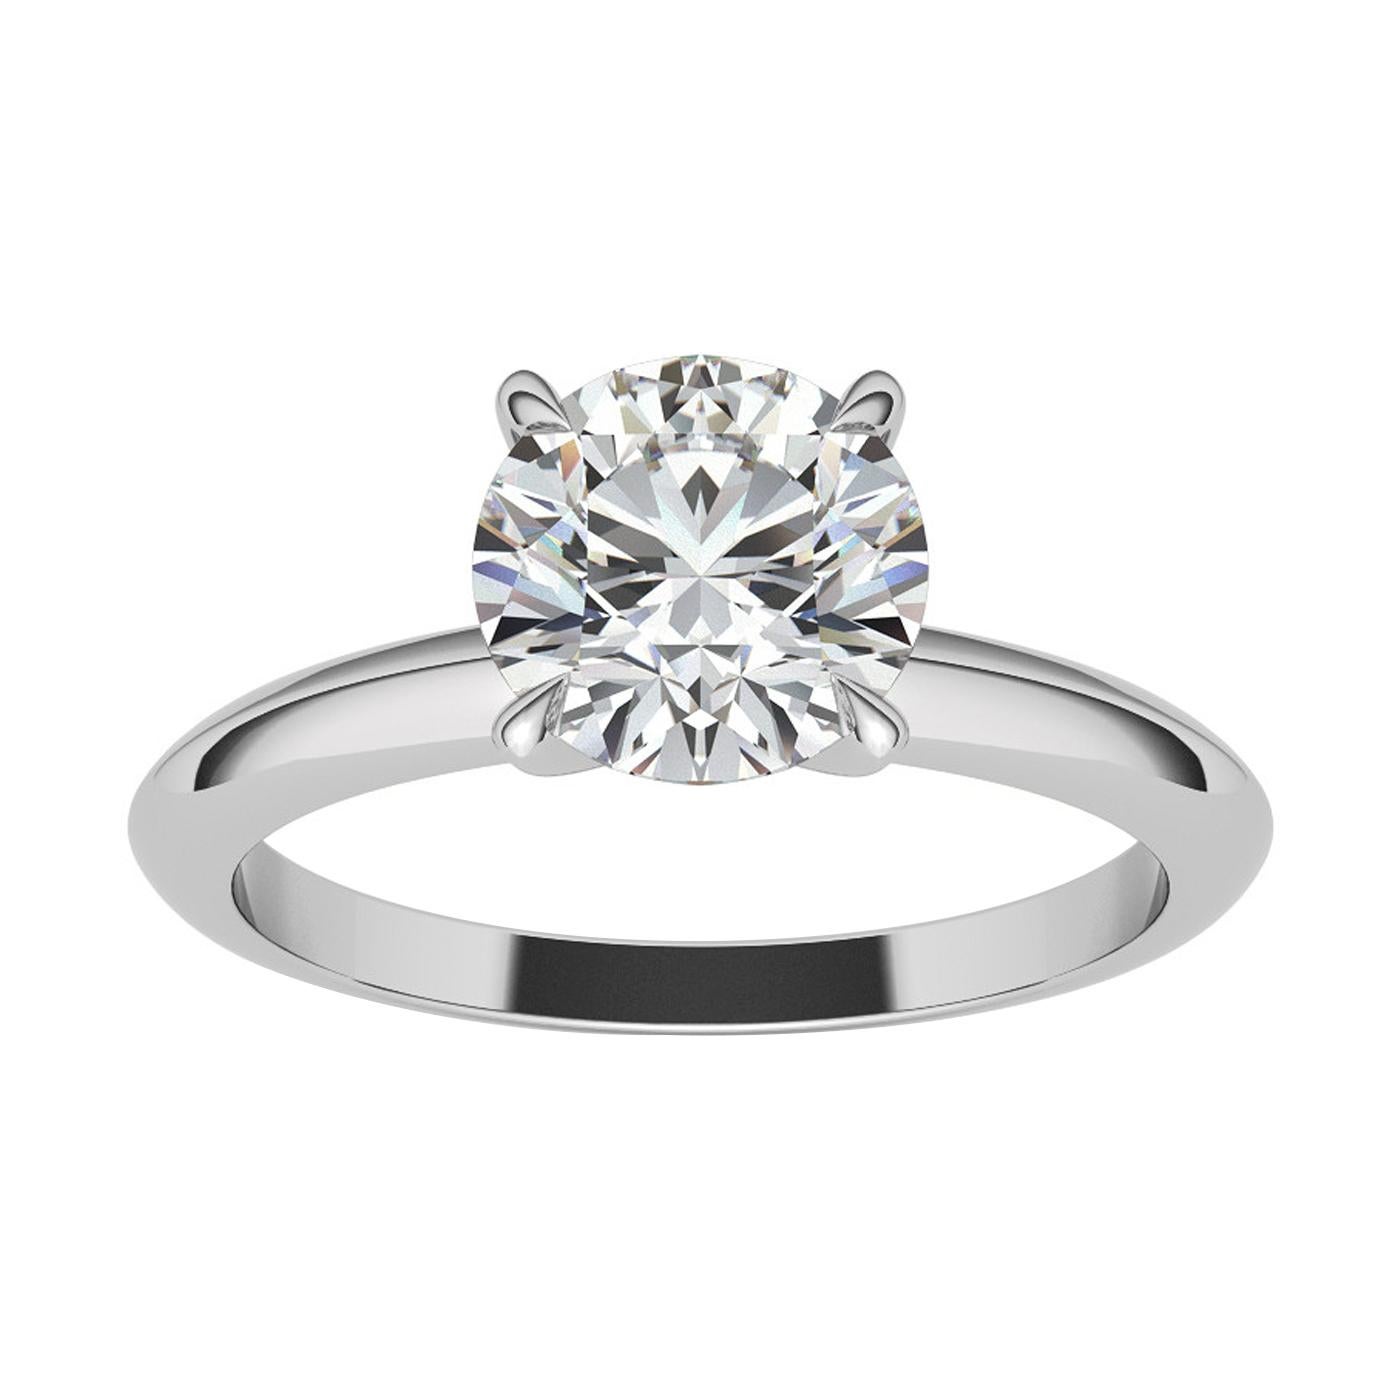 This Tiffany-style engagement ring contains one round brilliant cut diamond set into a four-prong head. Flawlessly created, This diamond ring is a timeless symbol of enduring beauty, destined to be treasured for generations to come. This exquisite